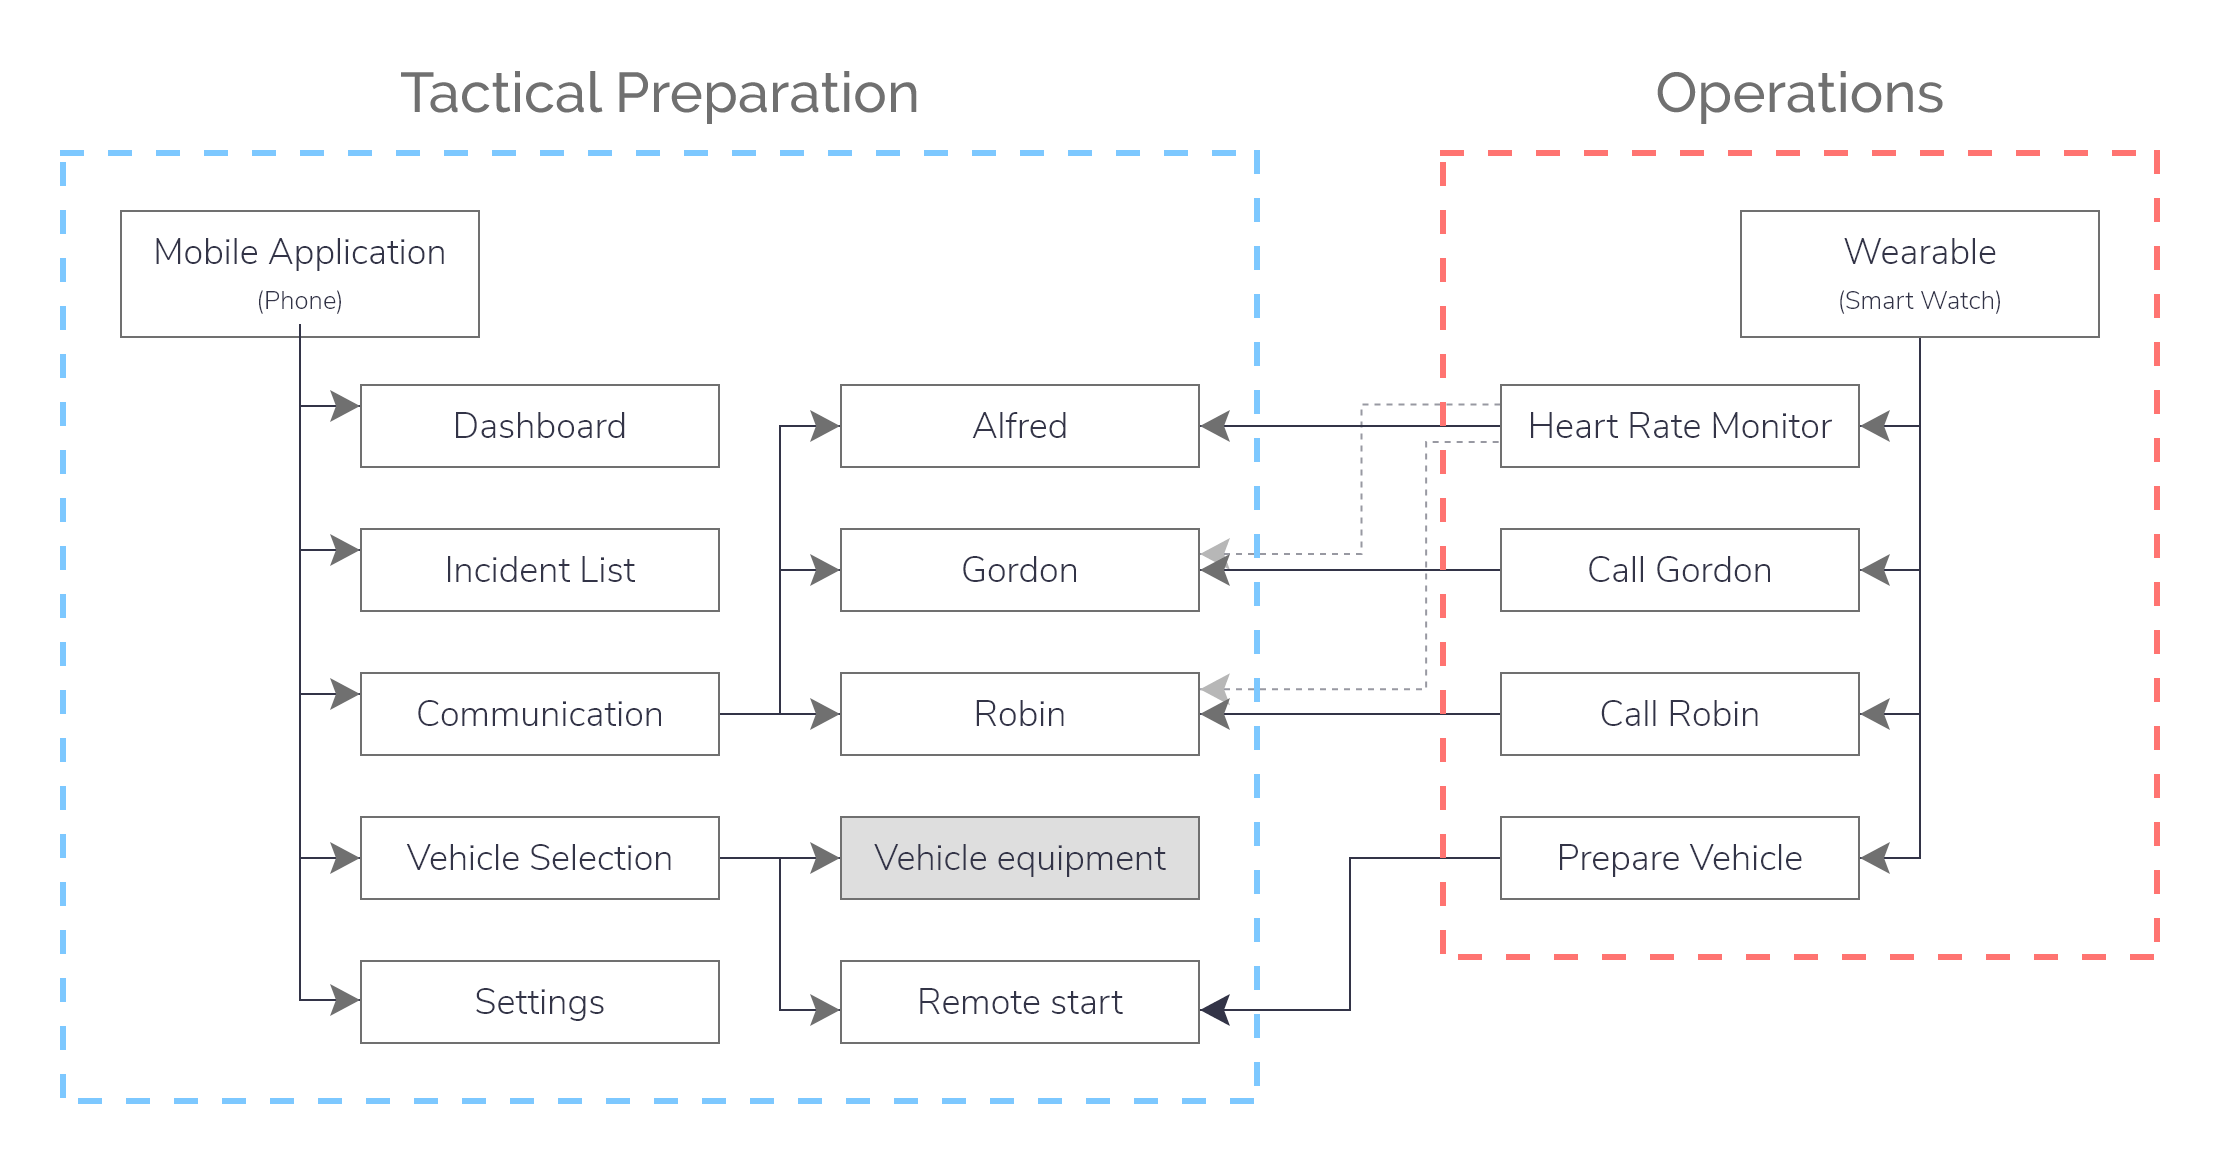 A flow chart showing the relationship between tactical and operational aspects of the application